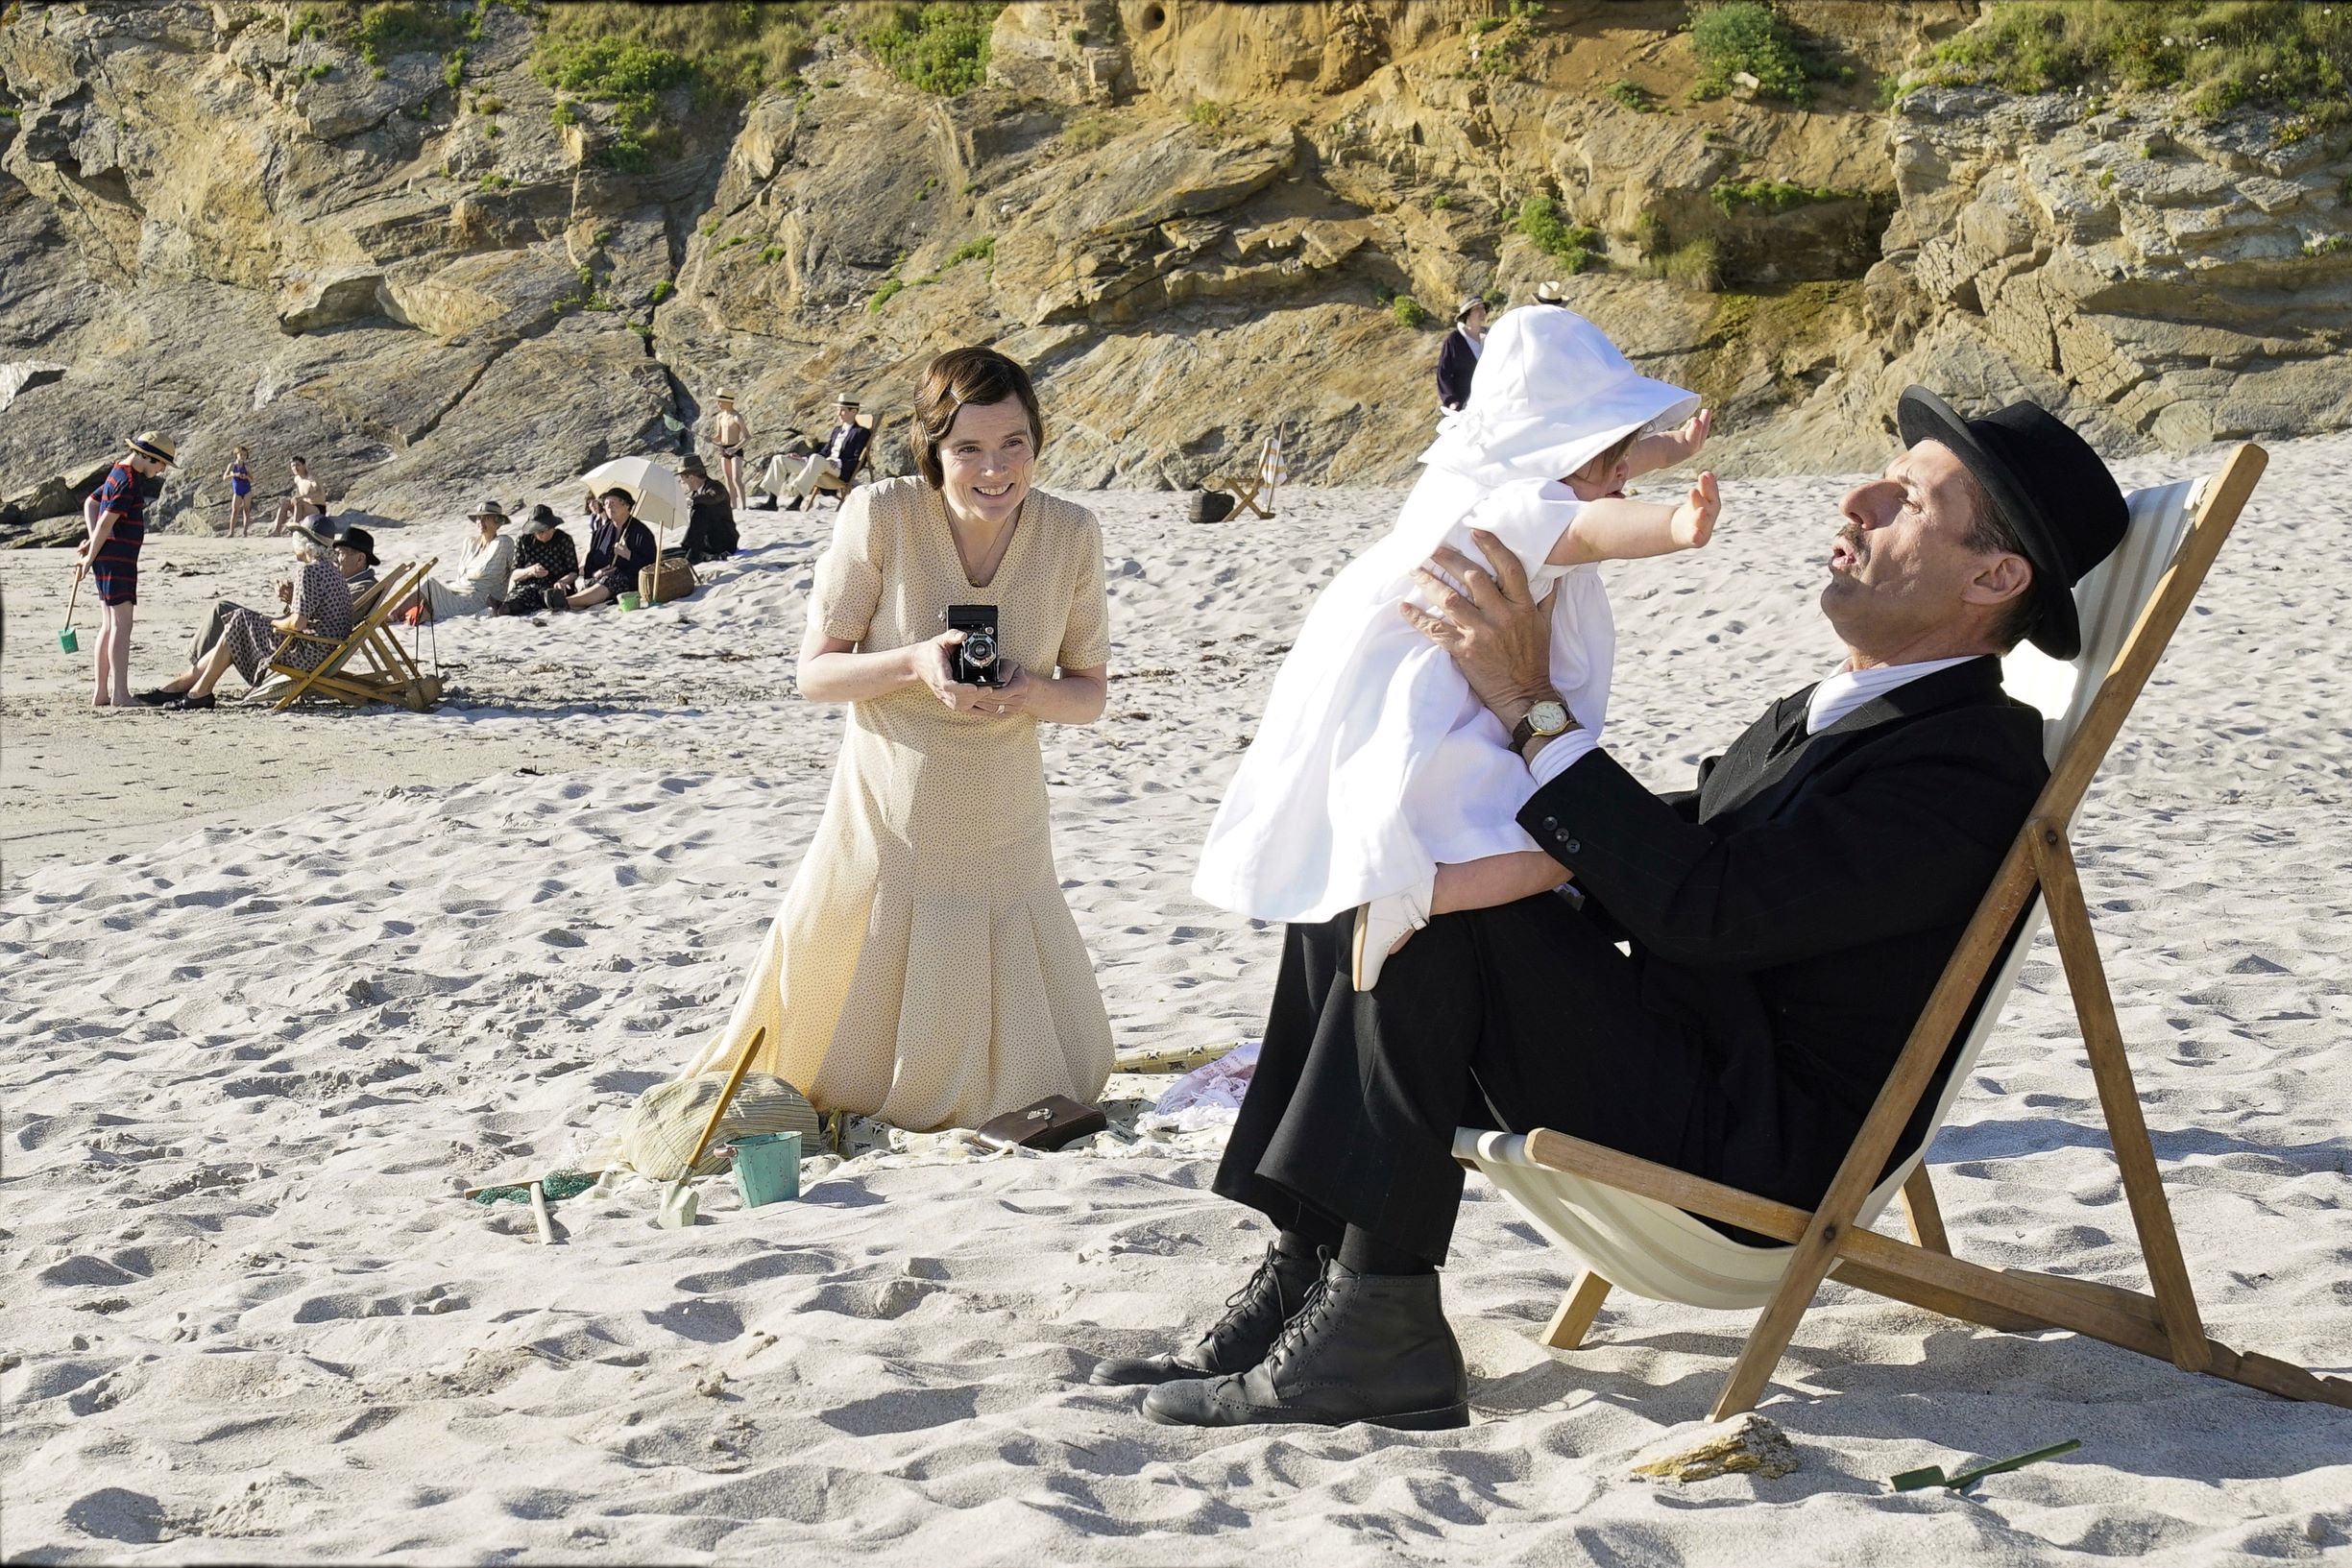 A beach holiday scene from the film De Gaulle.